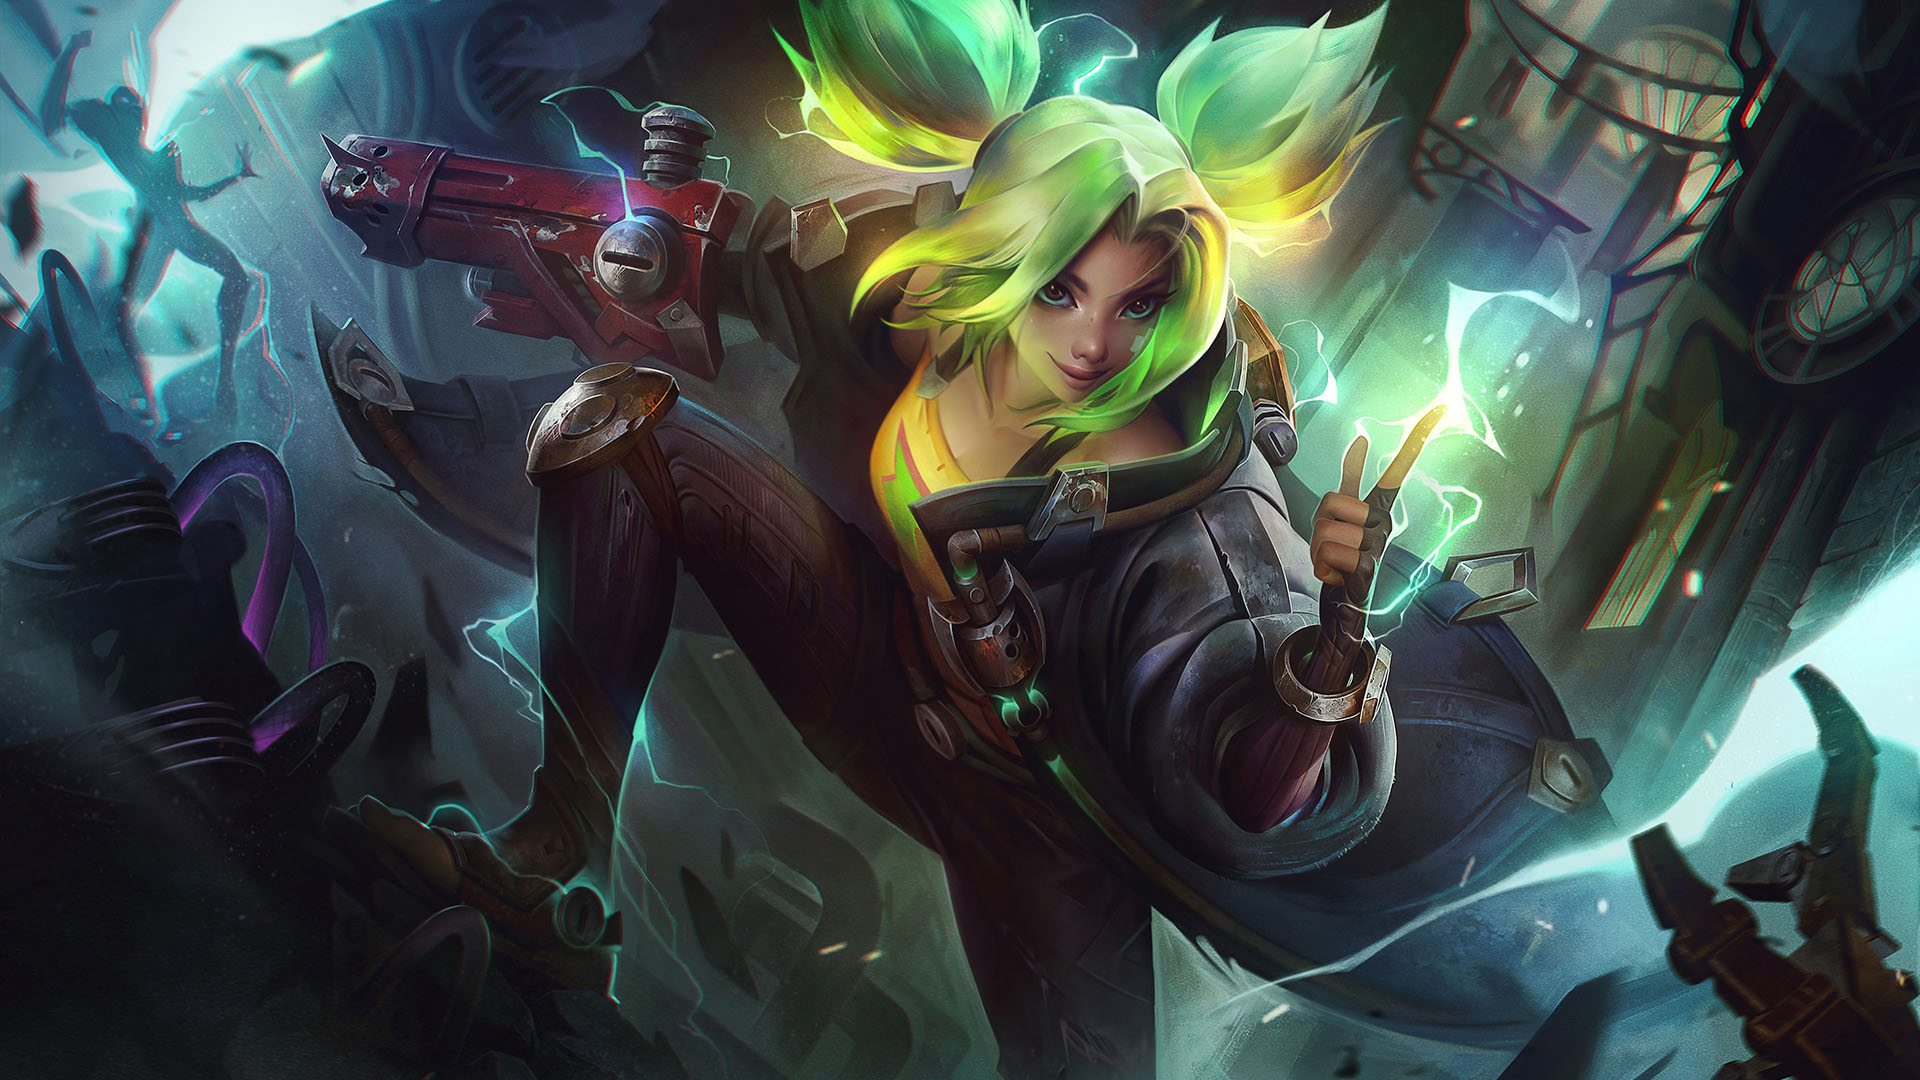 League of Legends - Zeri, the Spark of Zaun, splash art. She is a young woman with green hair in pigtails, an oversized coat, and electricity coursing through her fingertips. She is fighting some bad guys, but looks relaxed and calm.